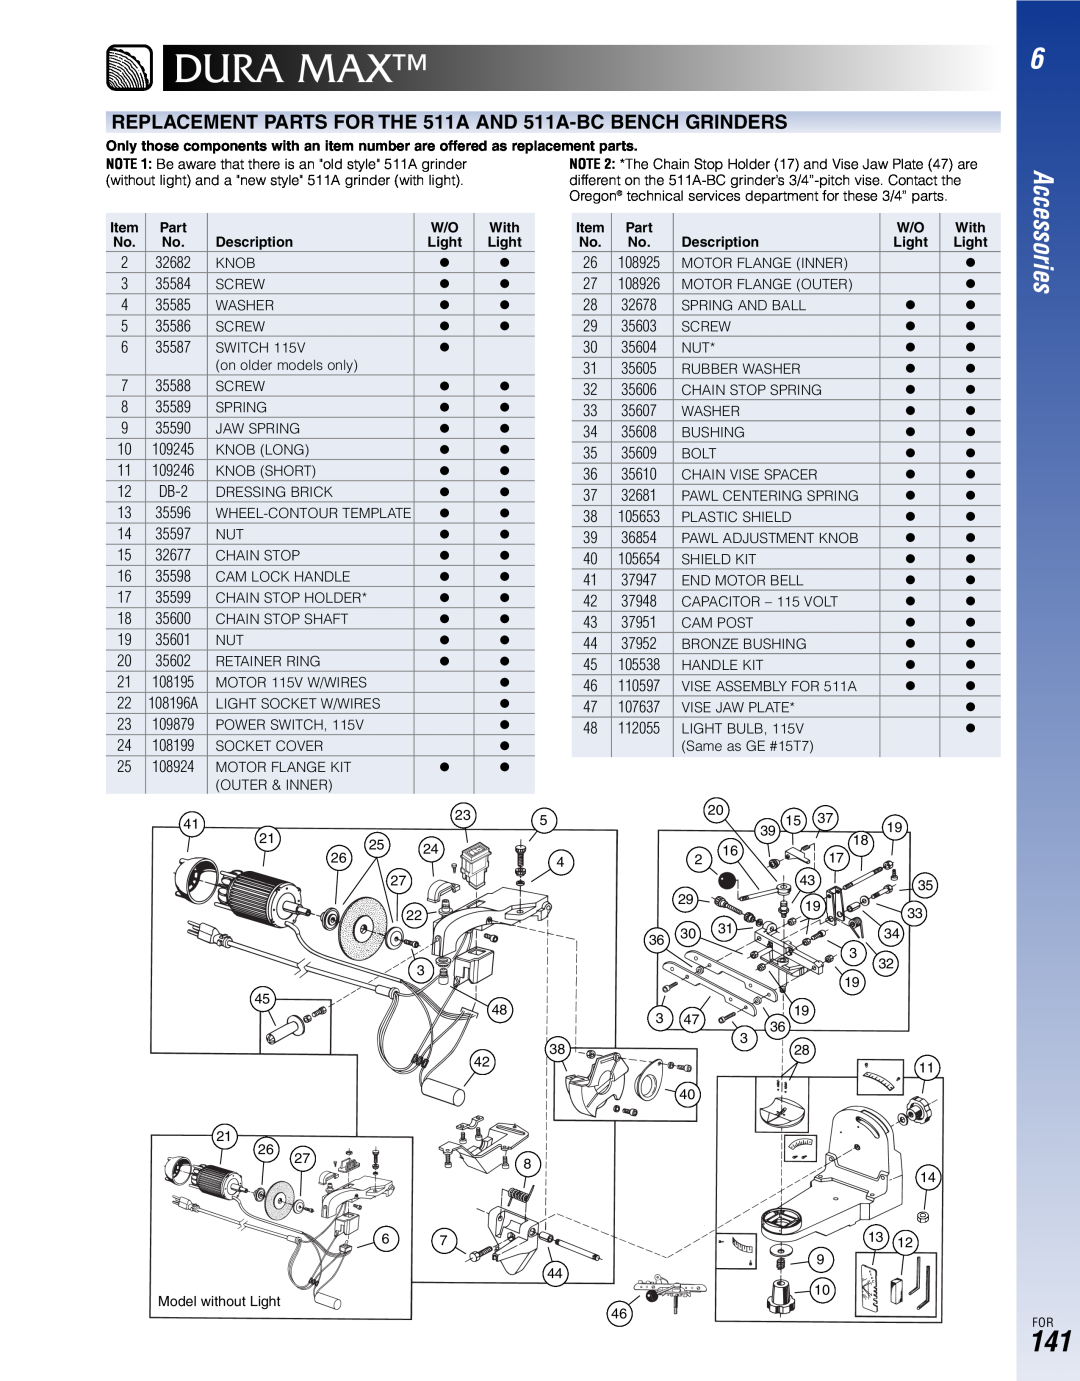 Oregon manual Duramax, Accessories, REPLACEMENT PARTS FOR THE 511A AND 511A-BC BENCH GRINDERS, DB-2 